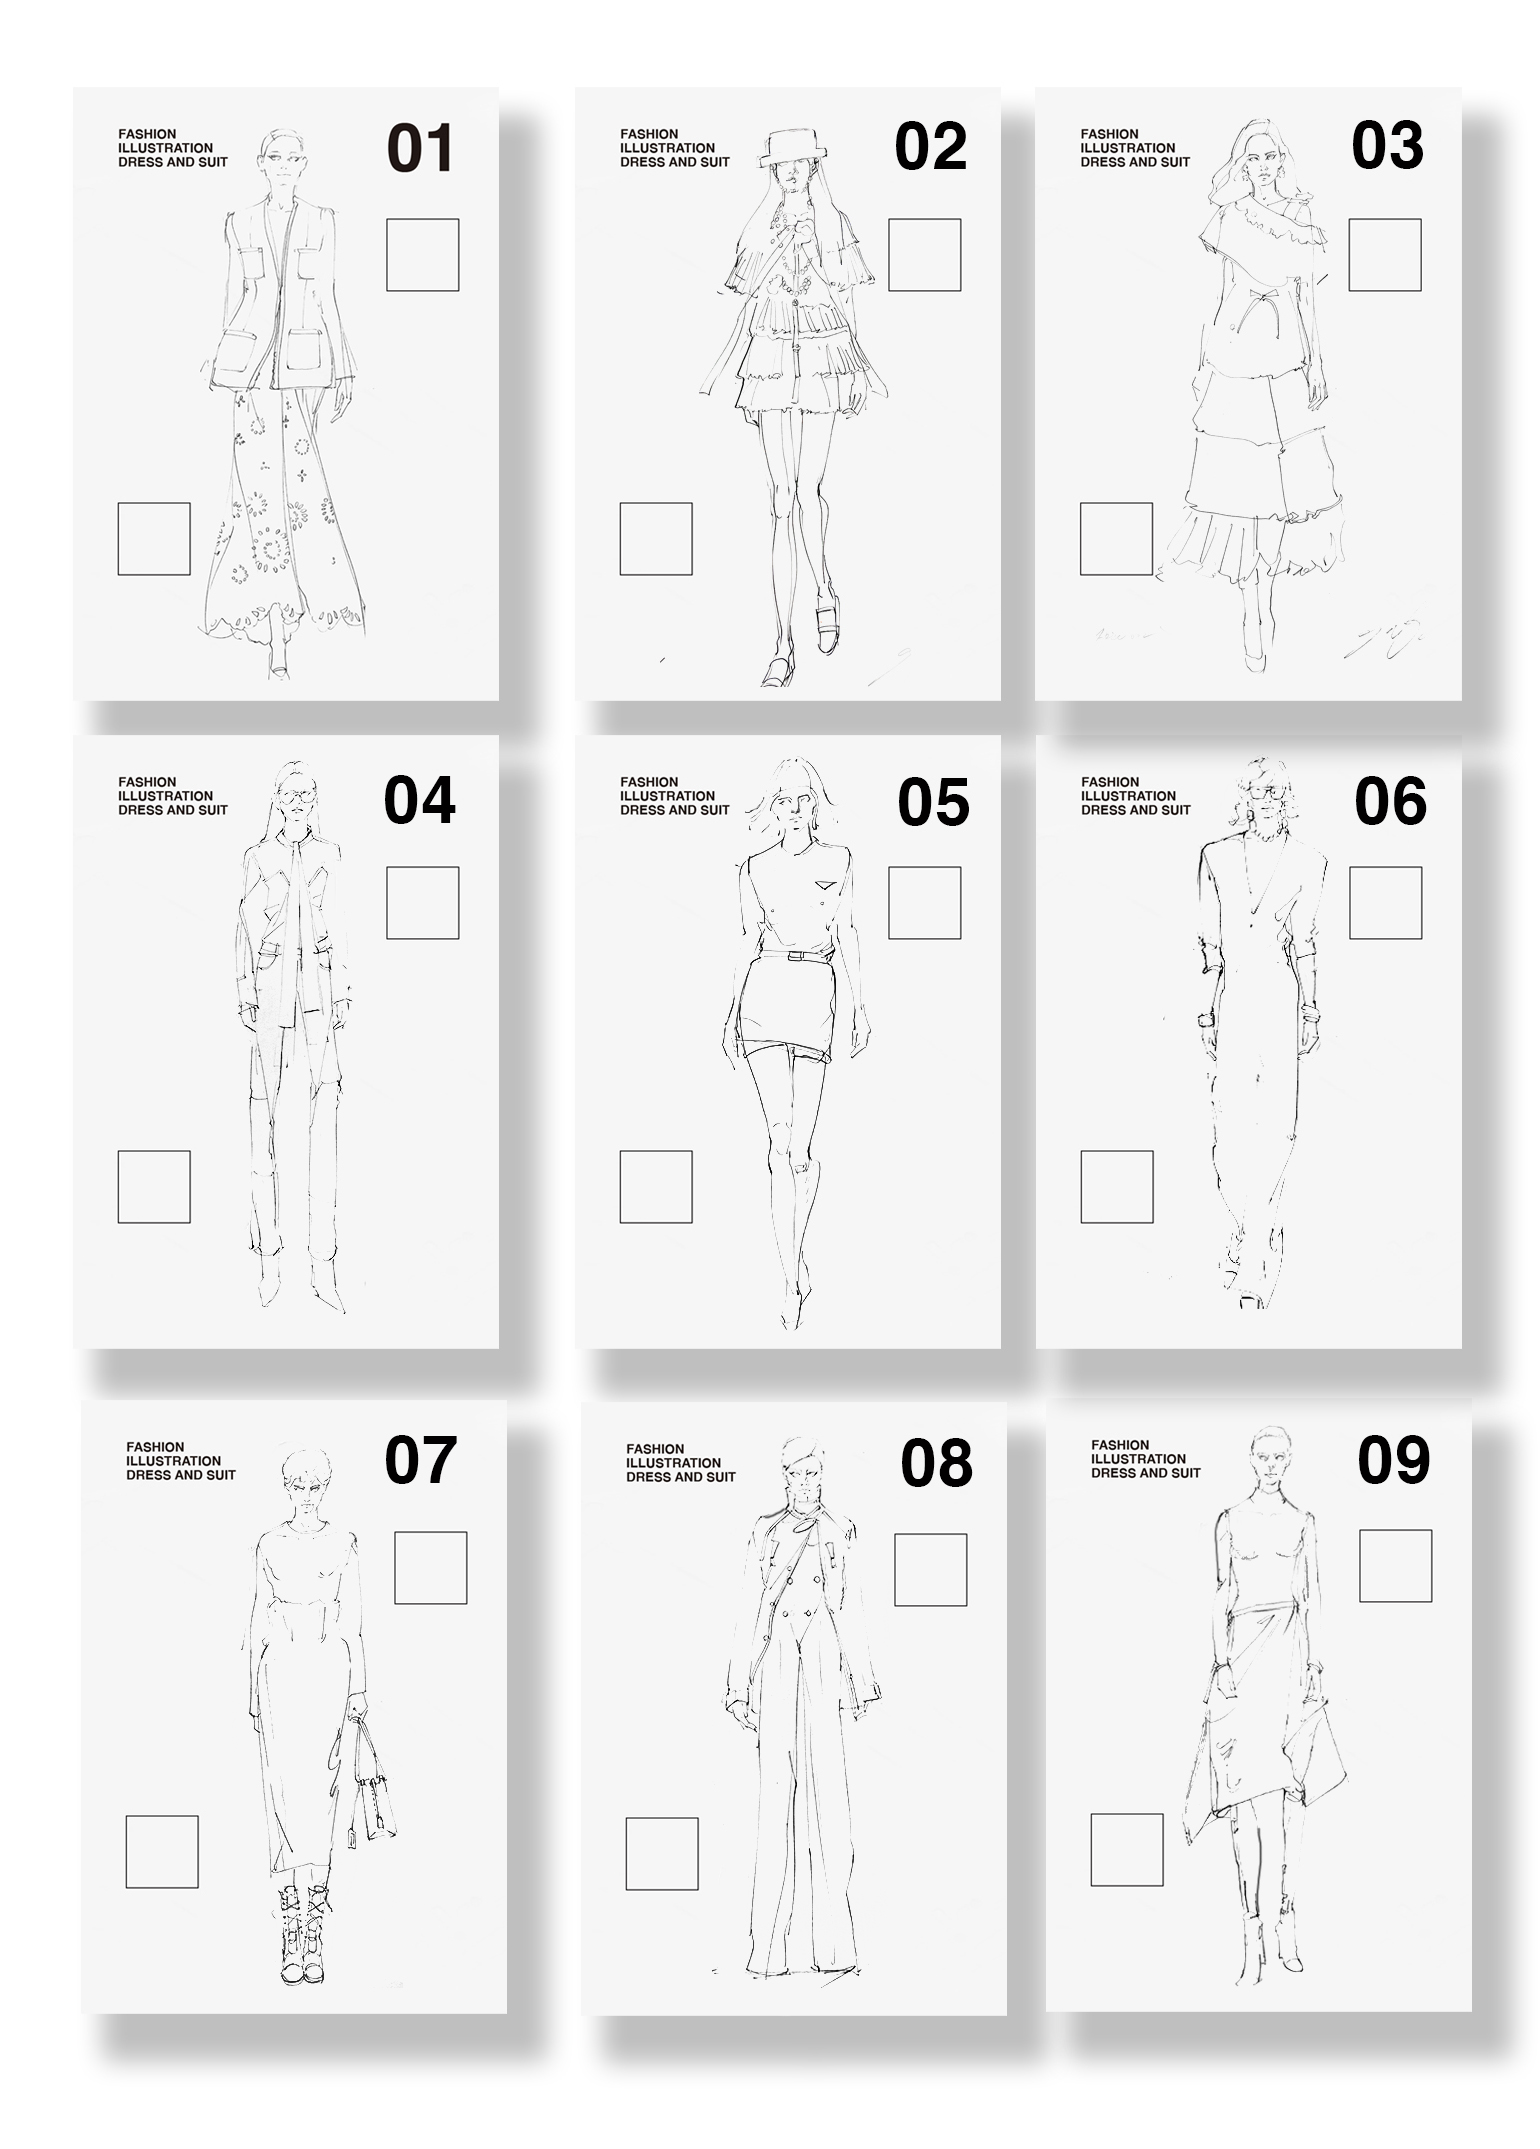 100 FASHION POSES IN TREND 